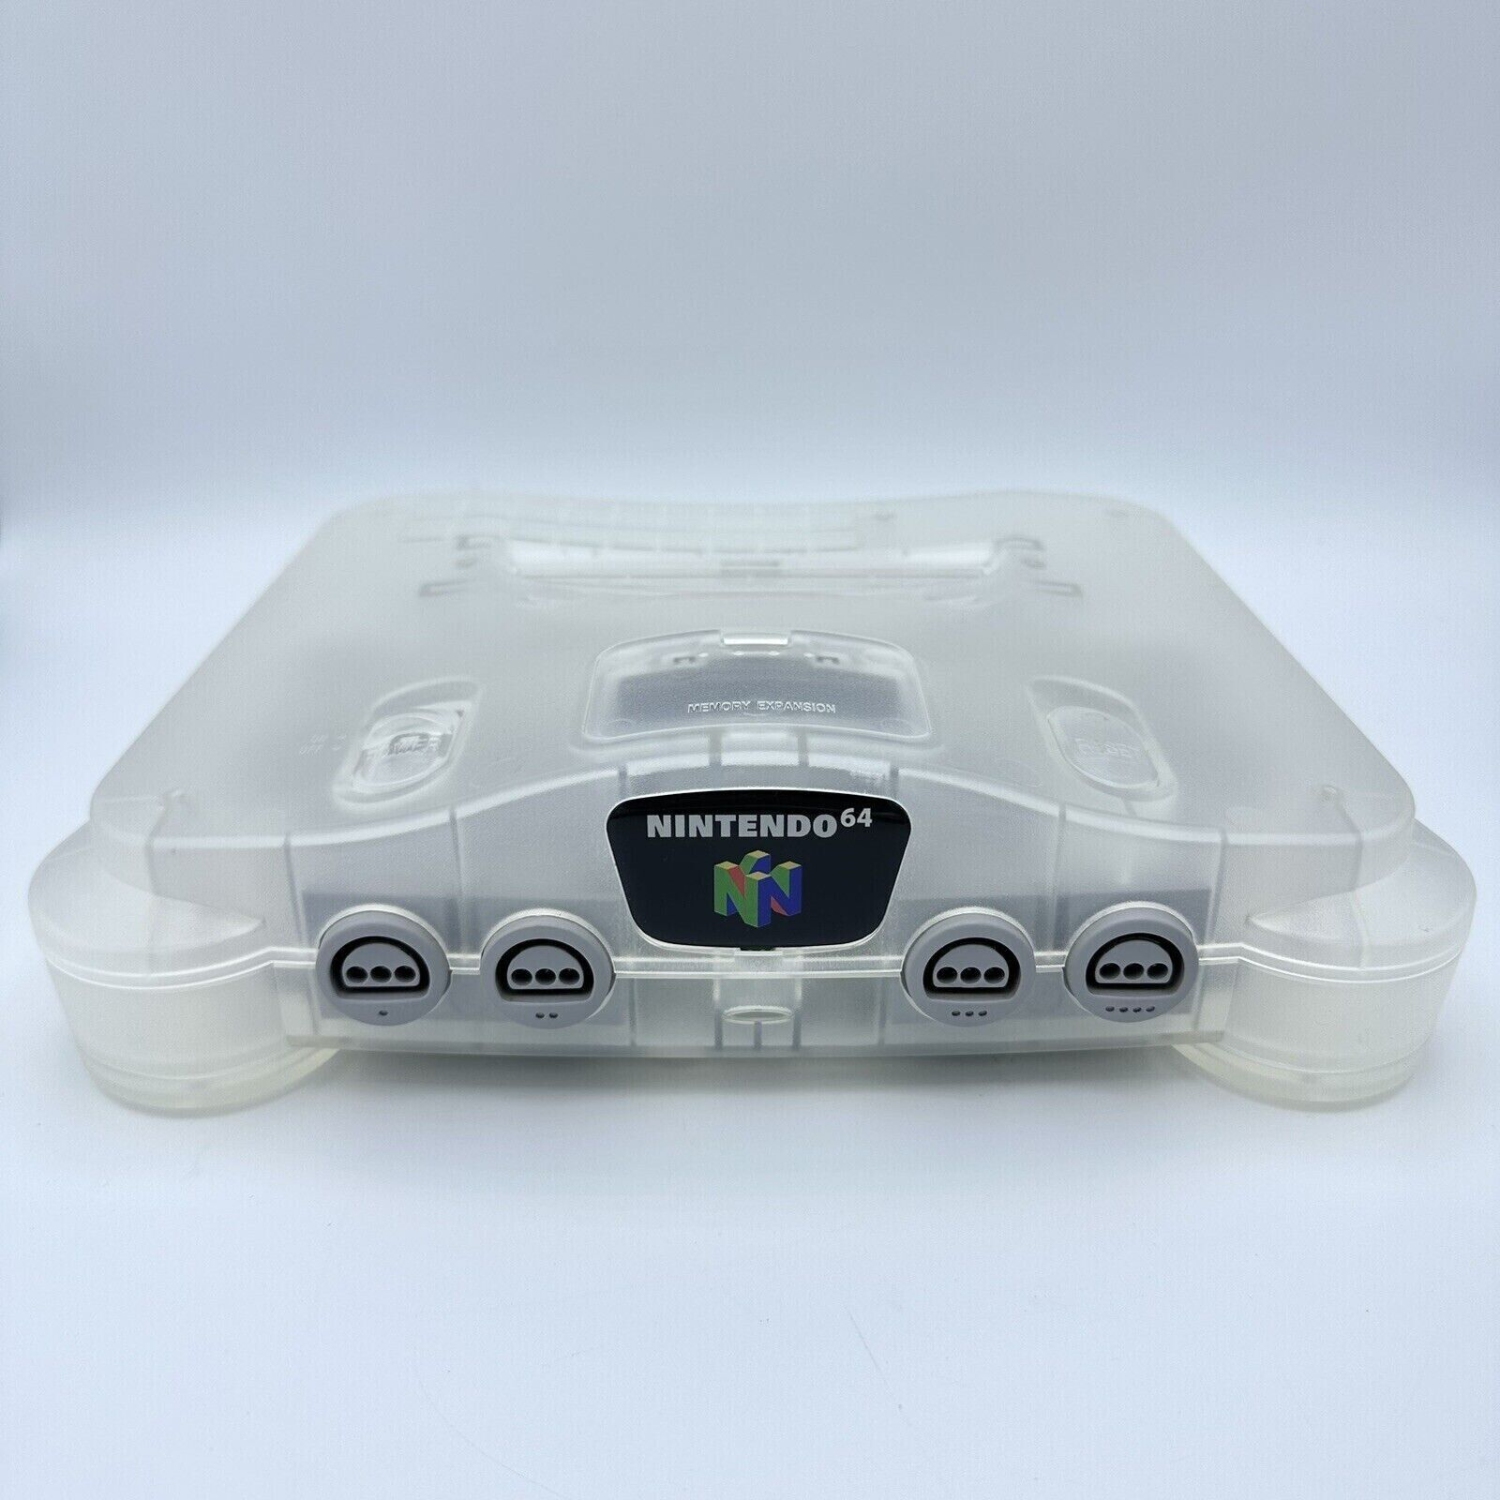 NINTENDO 64 CONSOLE Pre-Owned Refurbished Excellent Authentic Nintendo 64 N64 Clear Translucent Crystal White Region Free USA&JP